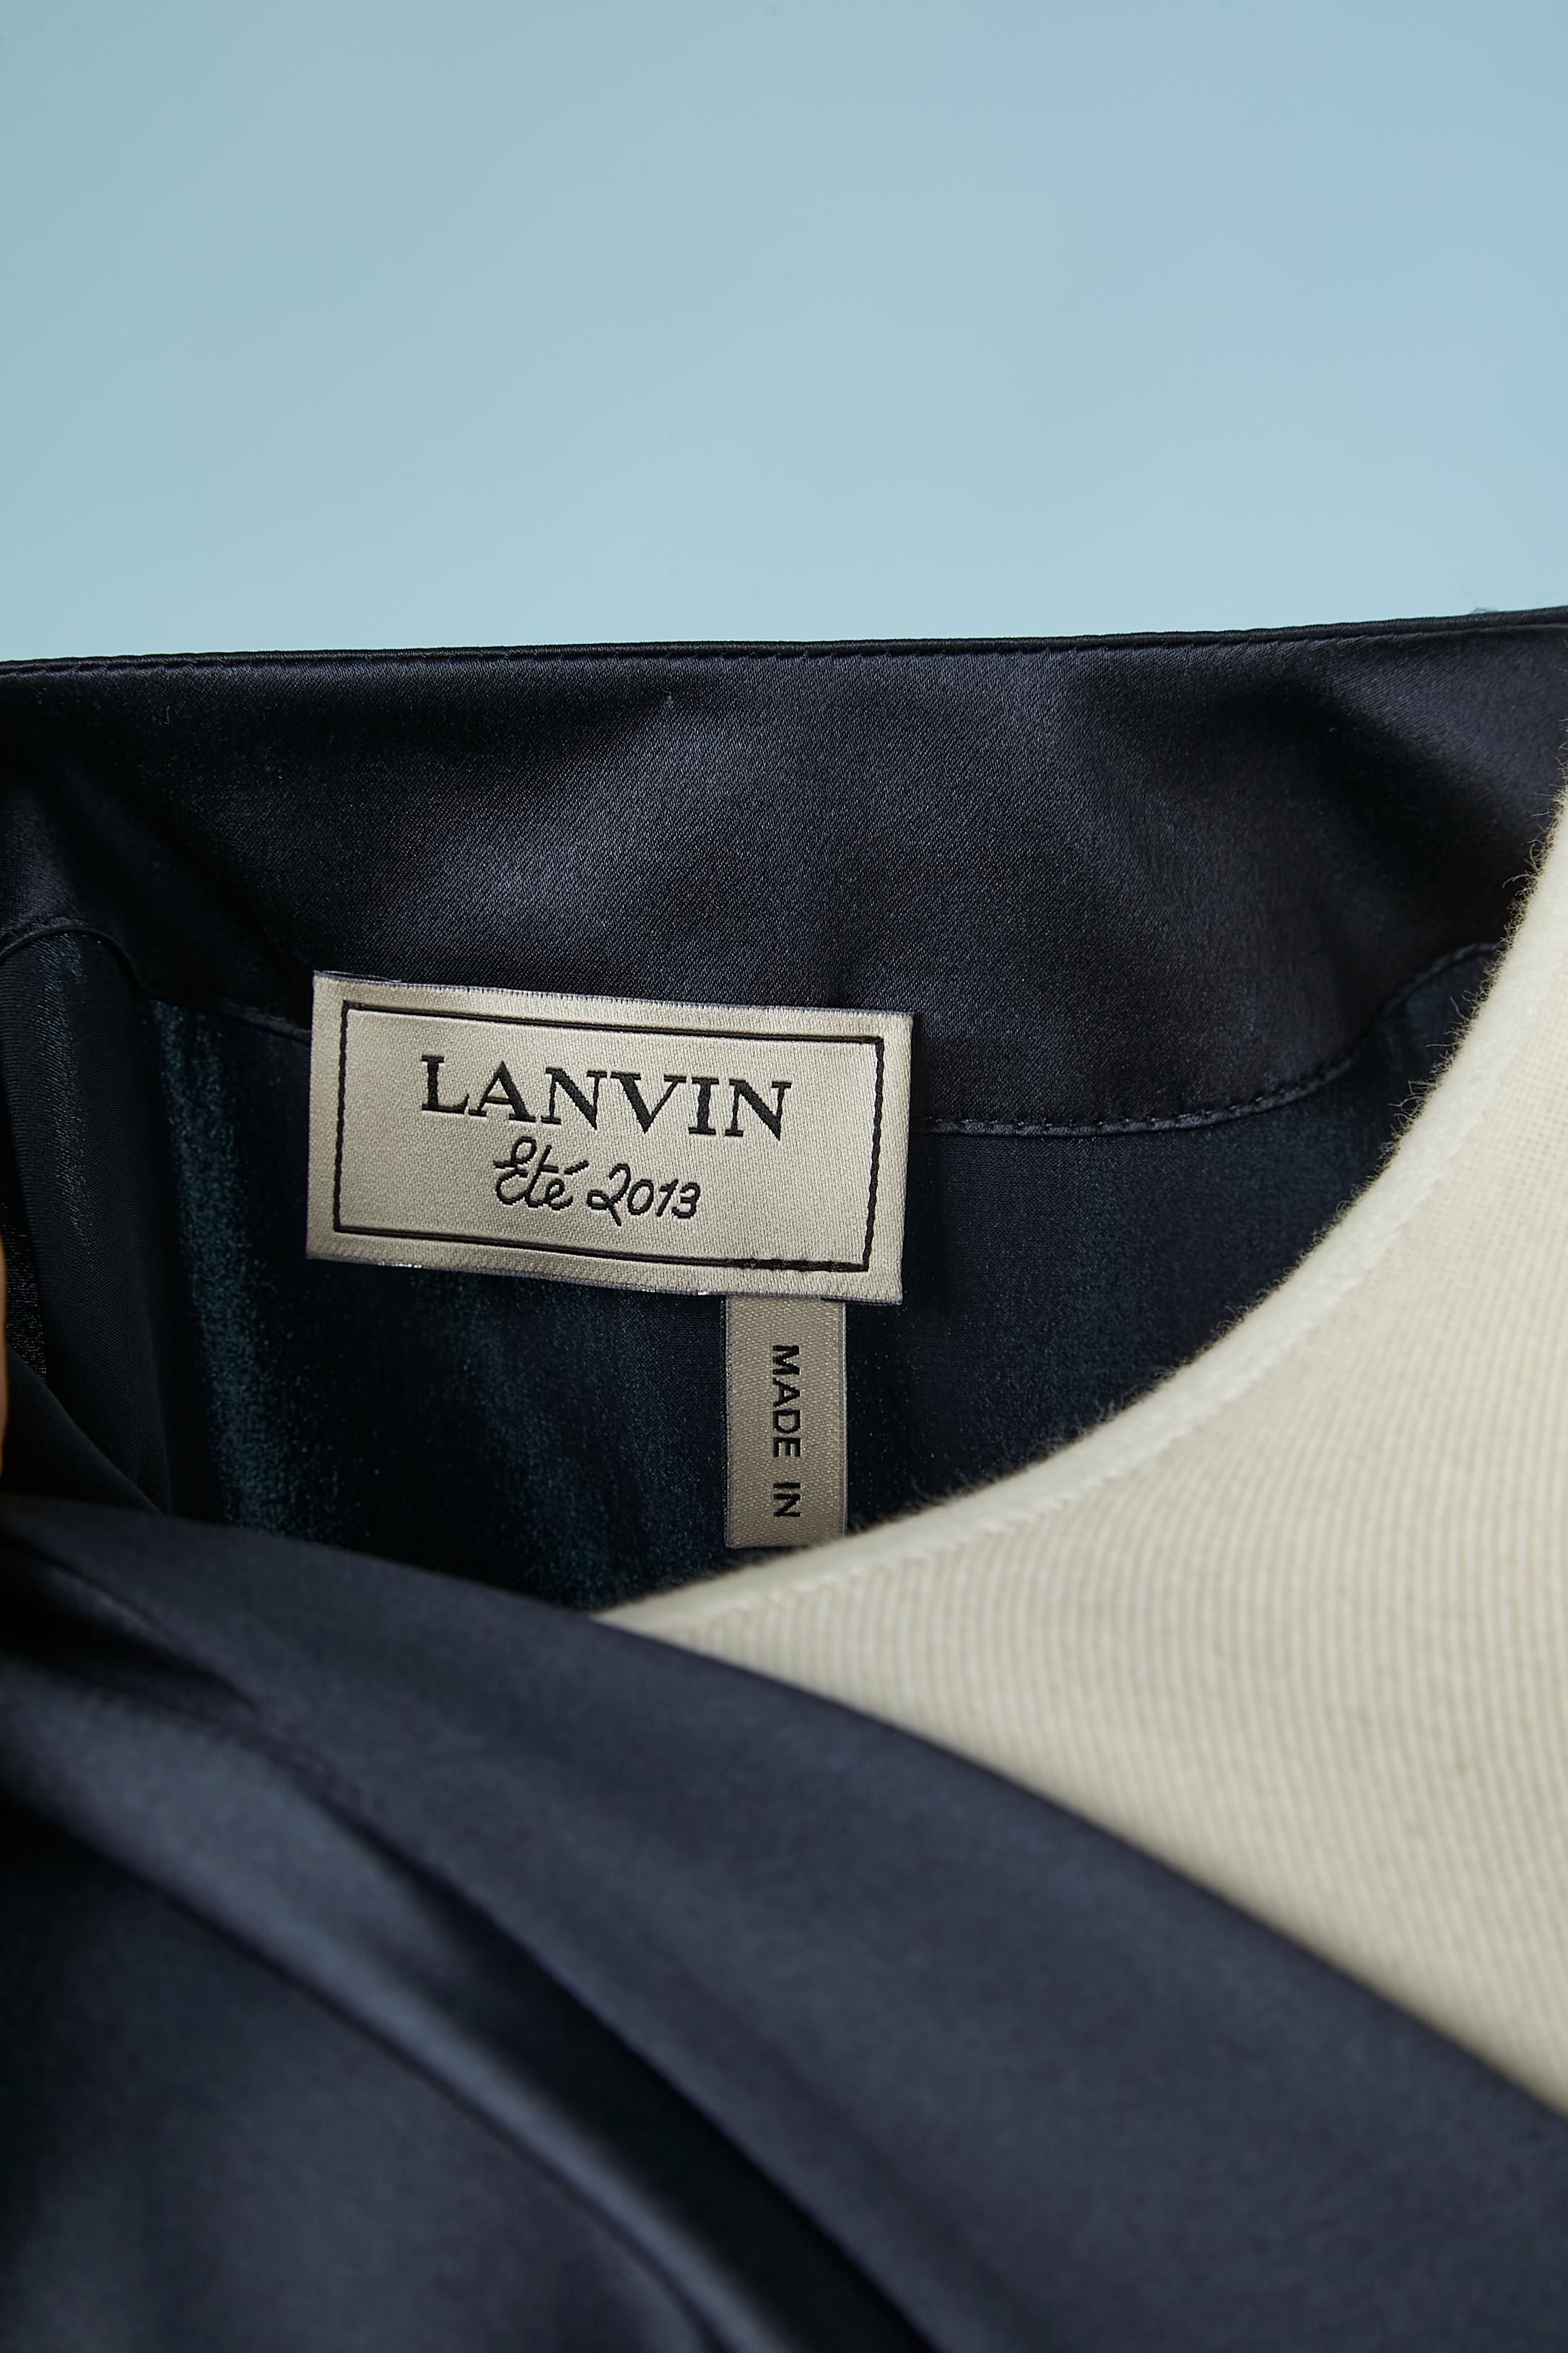 Navy blue draped cocktail dress with black satin bow Lanvin by Alber Elbaz  For Sale 3